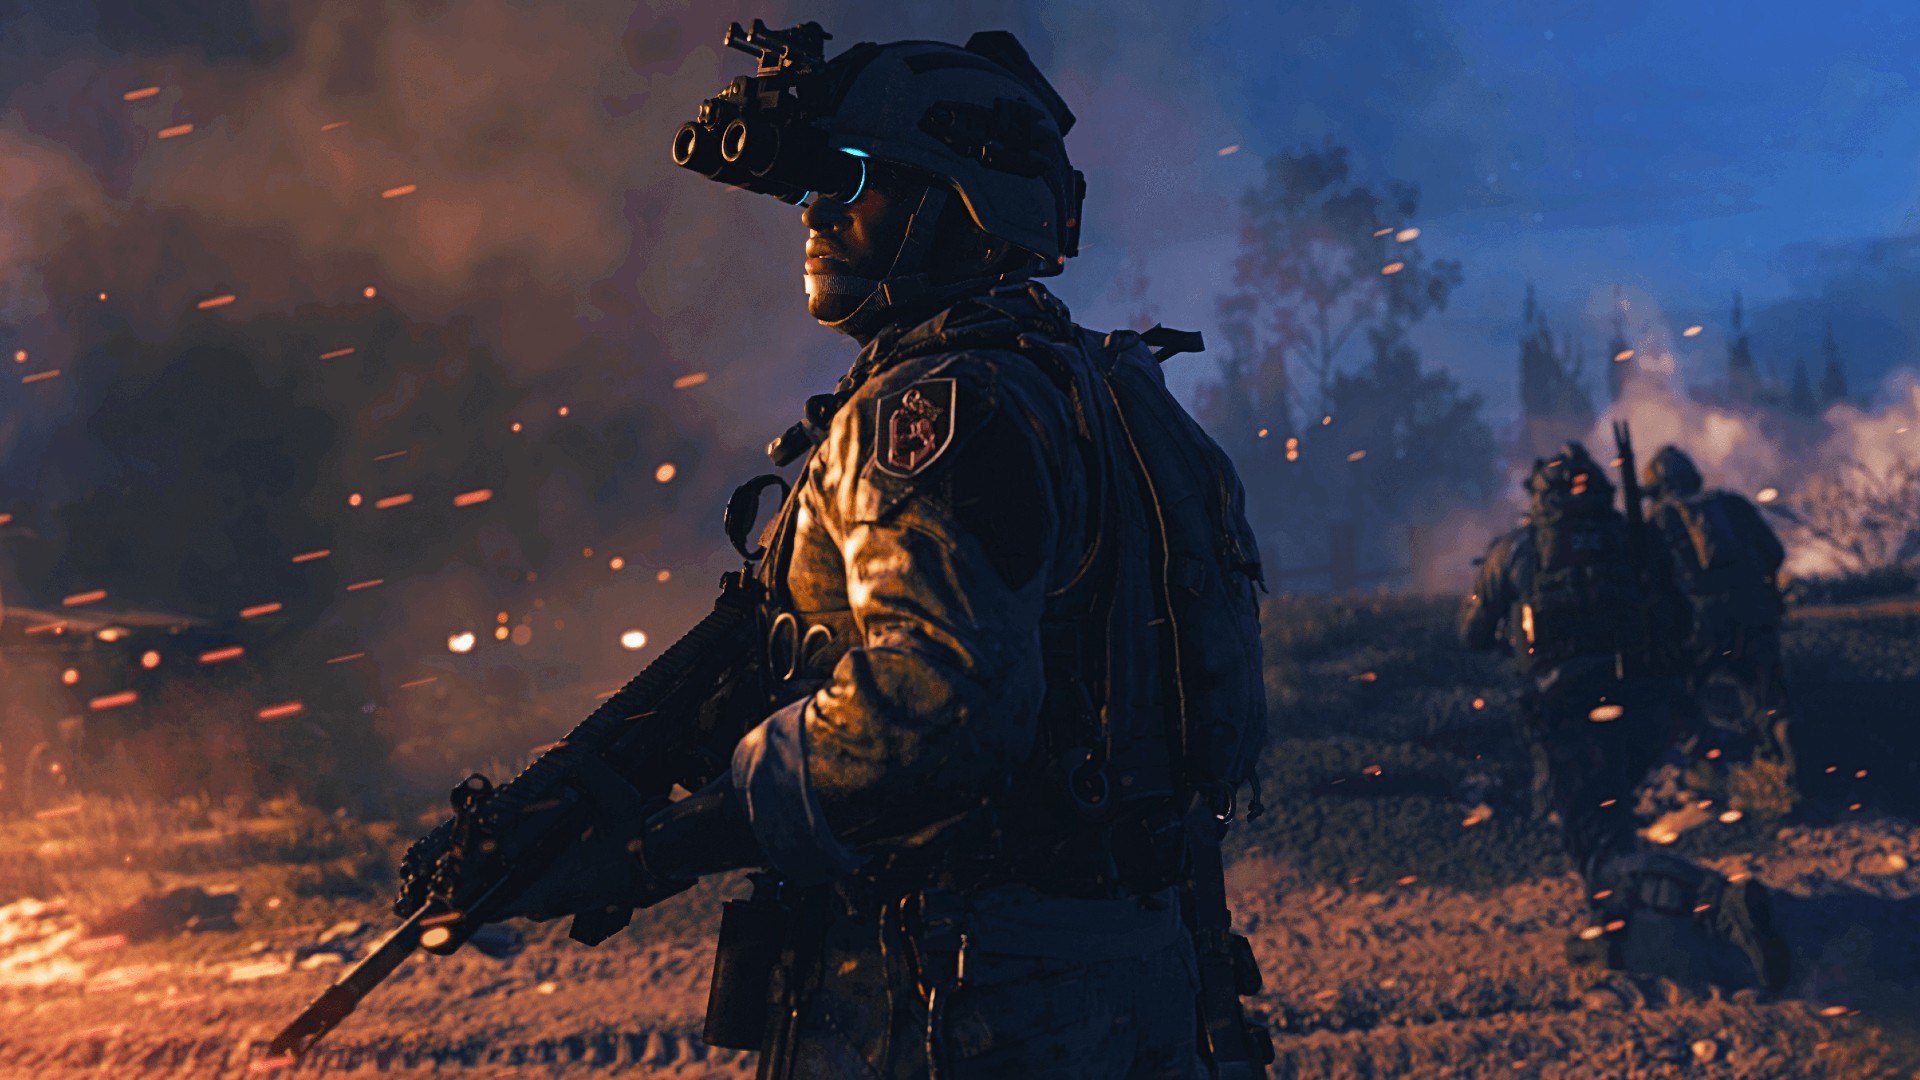 A soldier looks at the screen during the Call of Duty: Modern Warfare campaign